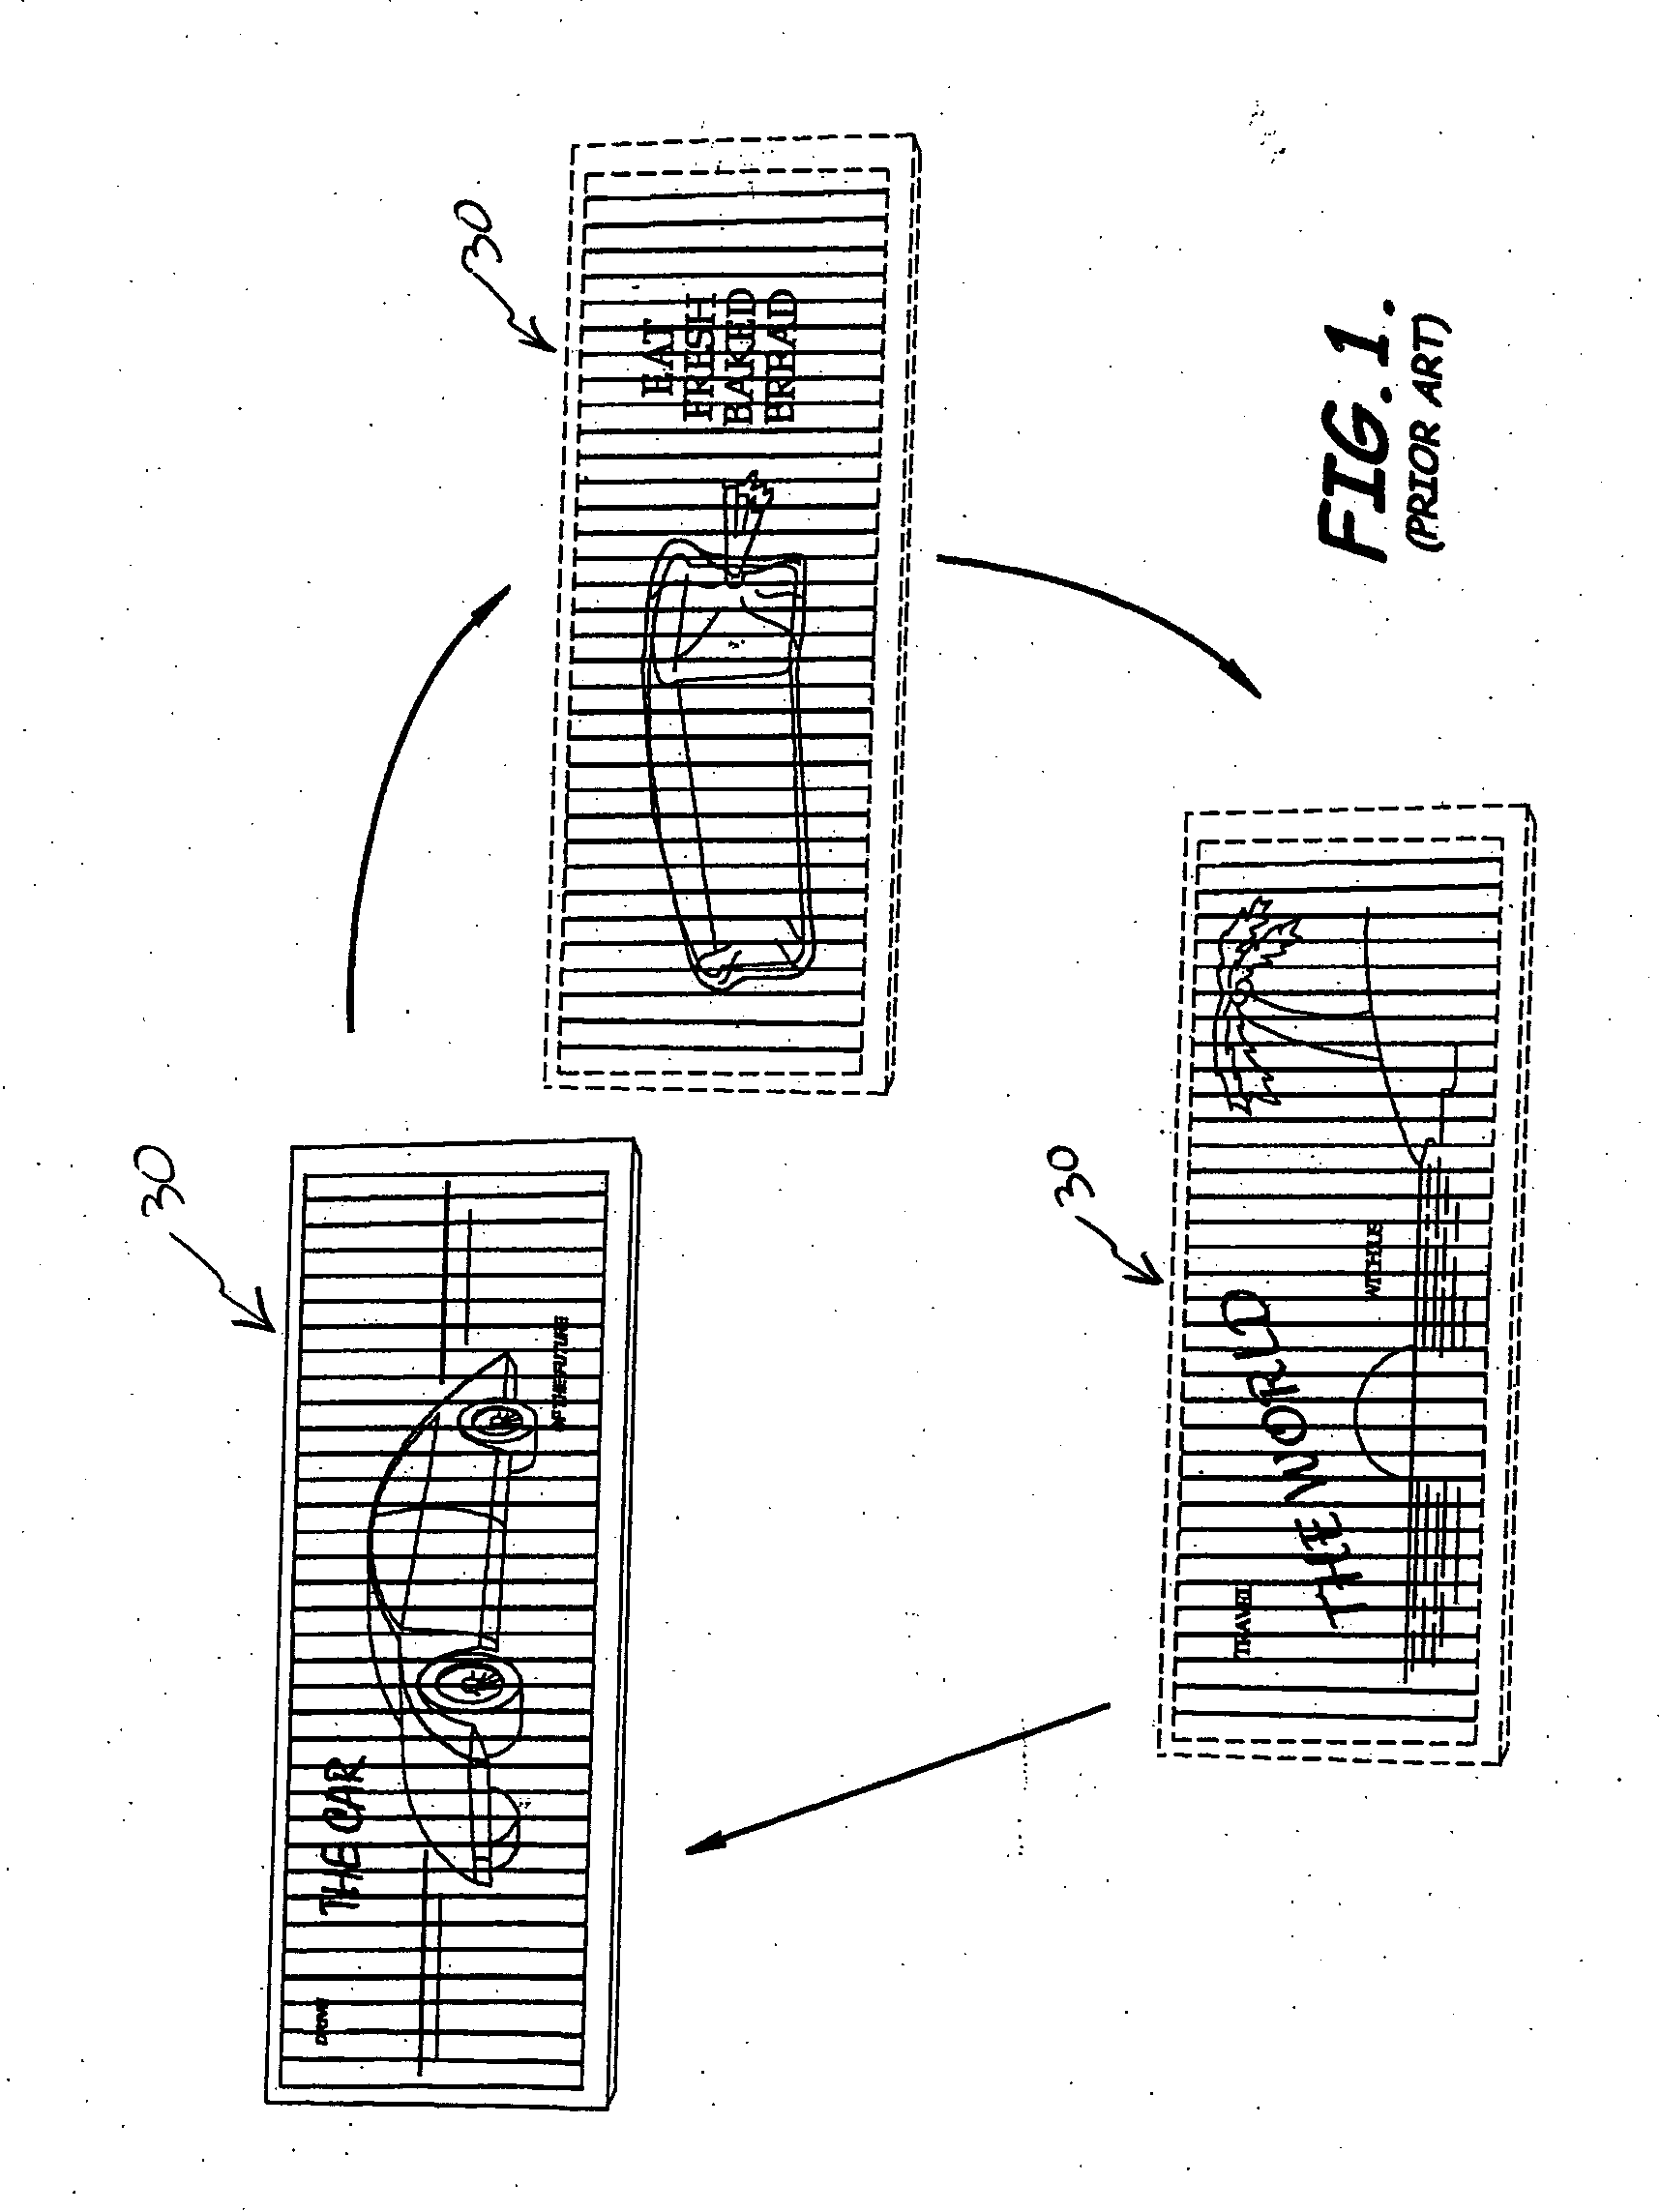 Display system having a magnetic drive assembly and associated methods